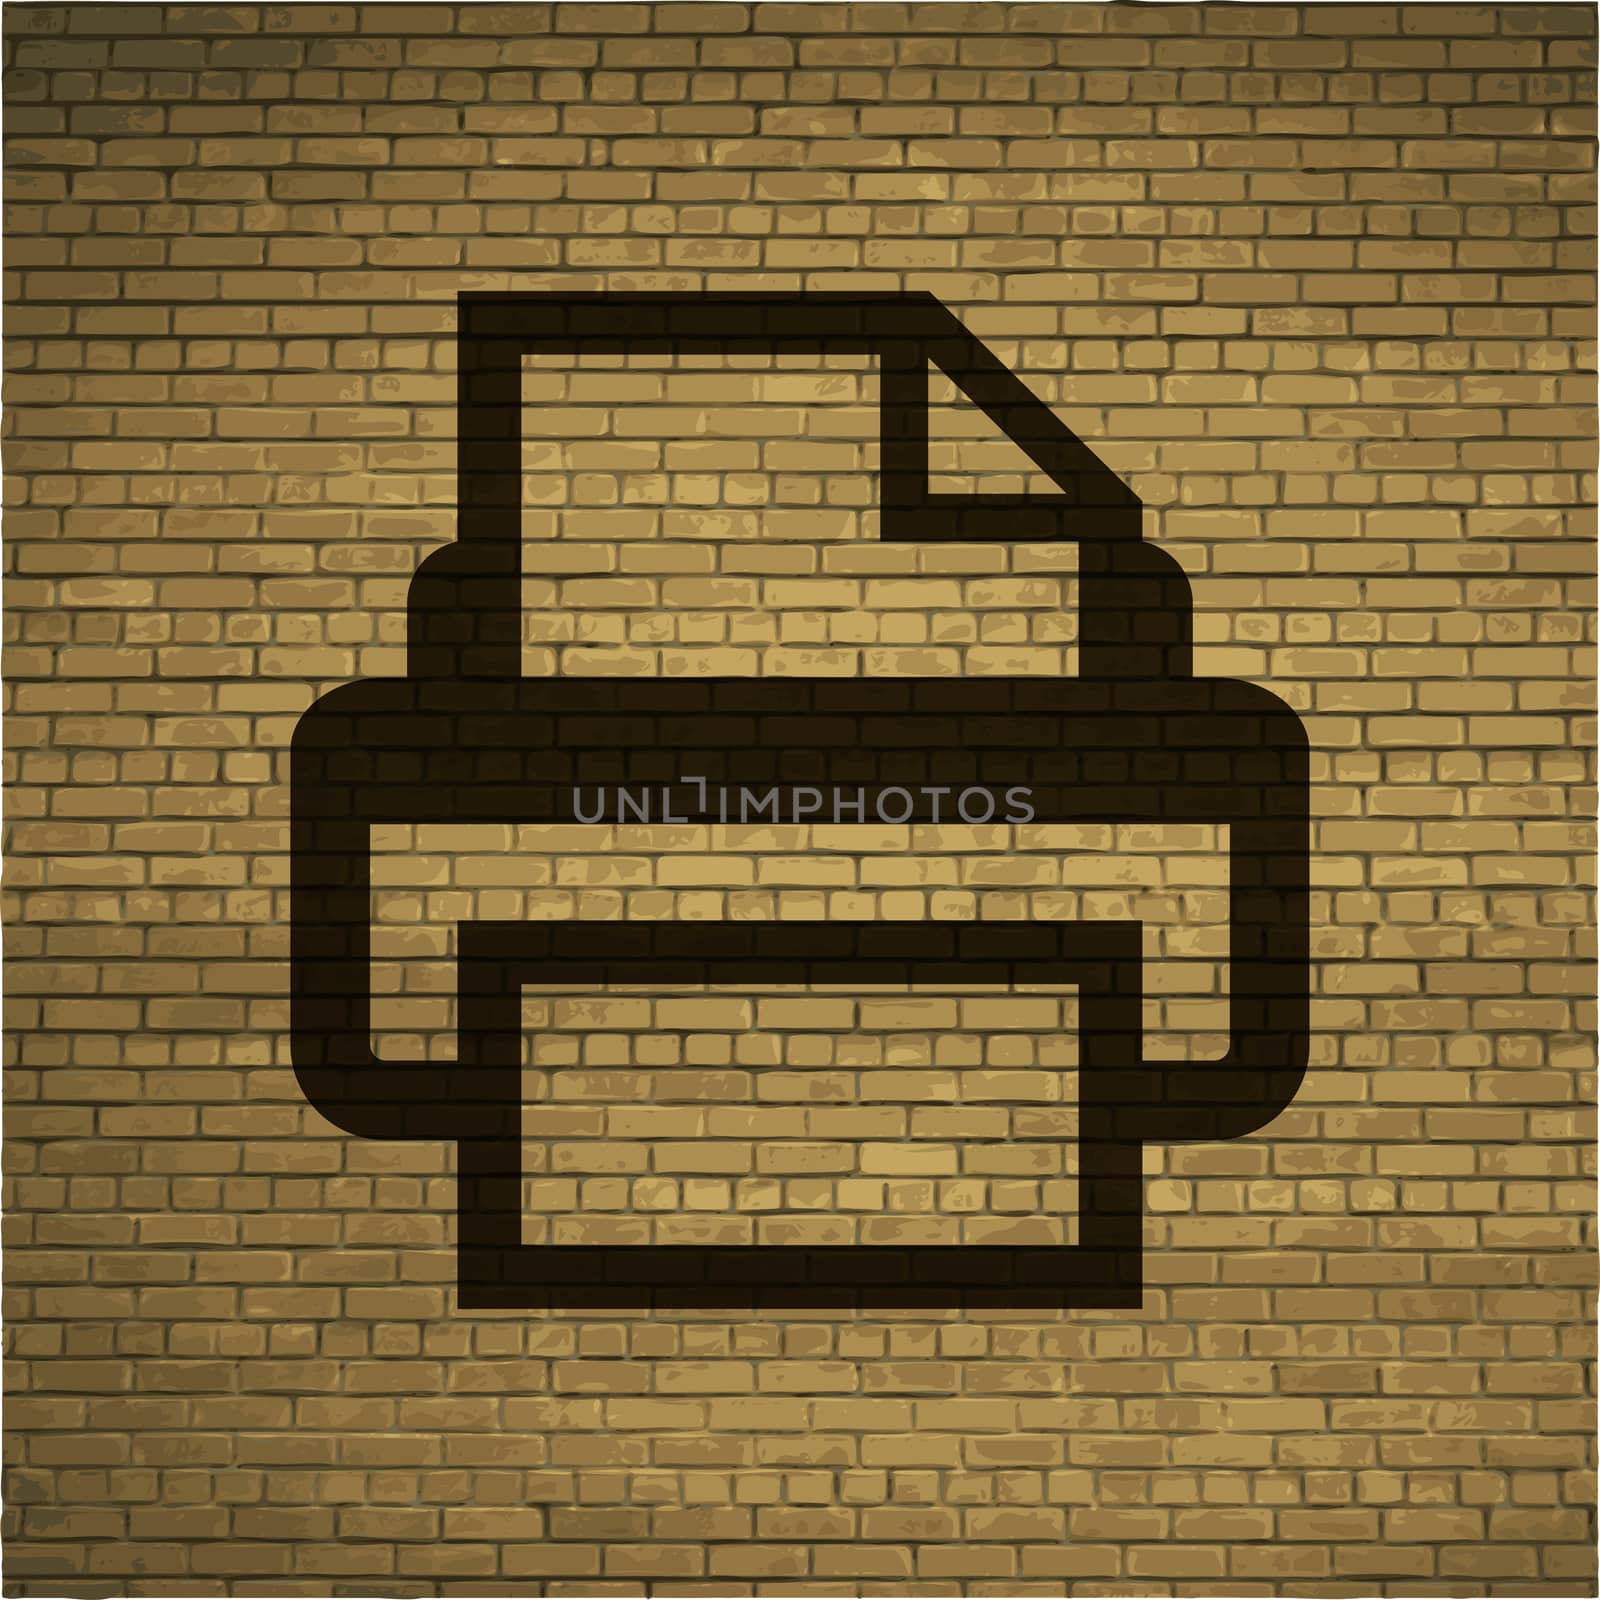 Printer icons Flat with abstract background.